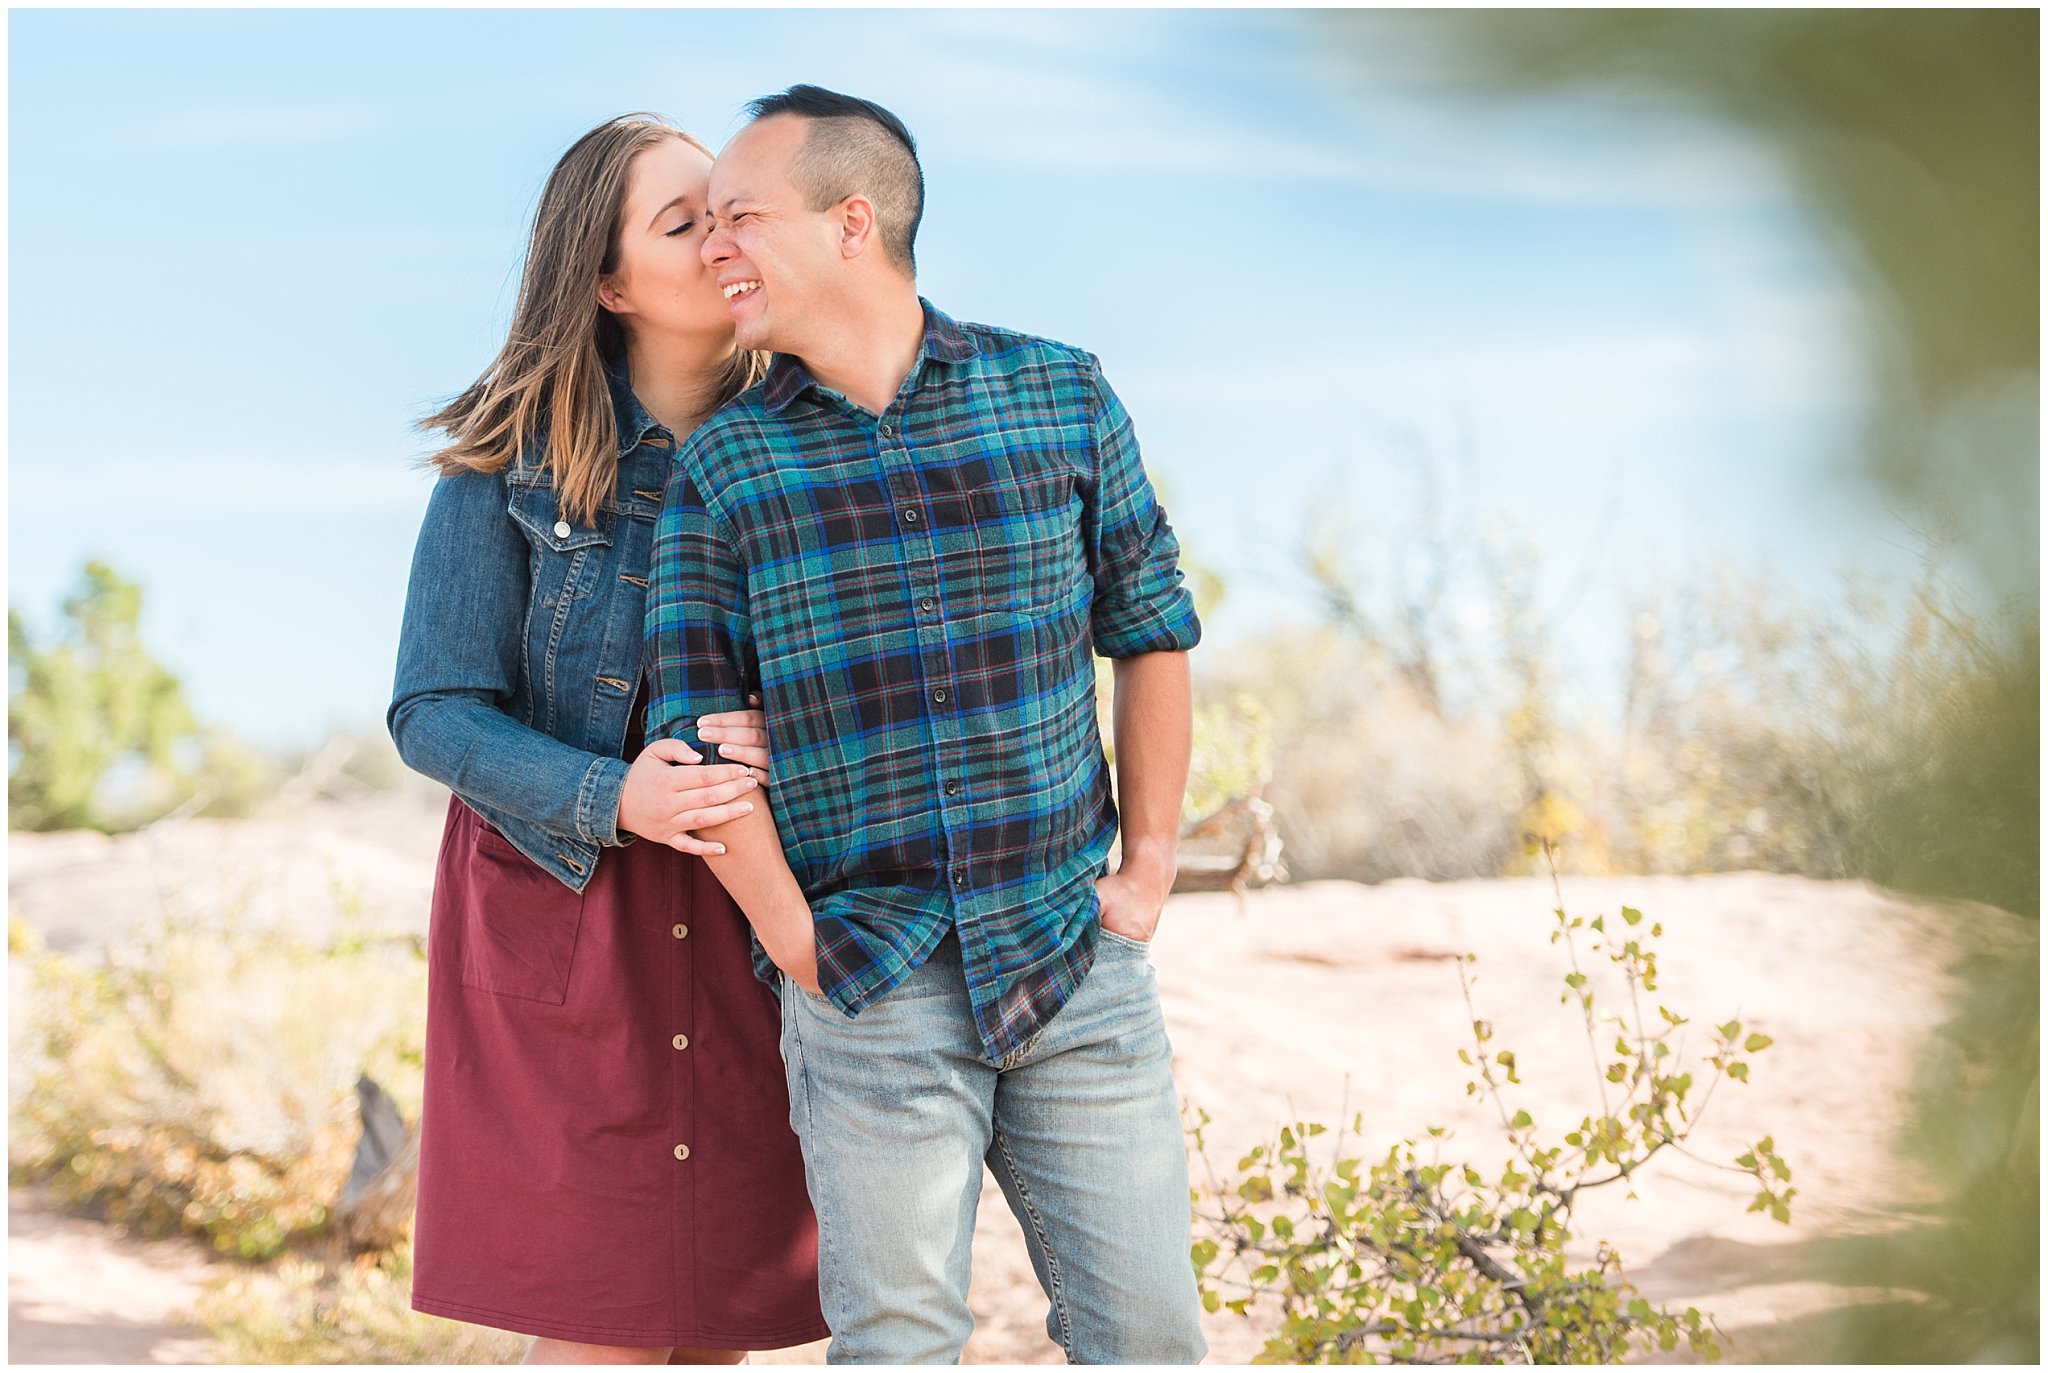 Couple in casual dress during engagement session at Dead Horse Point | Arches National Park and Dead Horse Point Engagement | Jessie and Dallin Photography